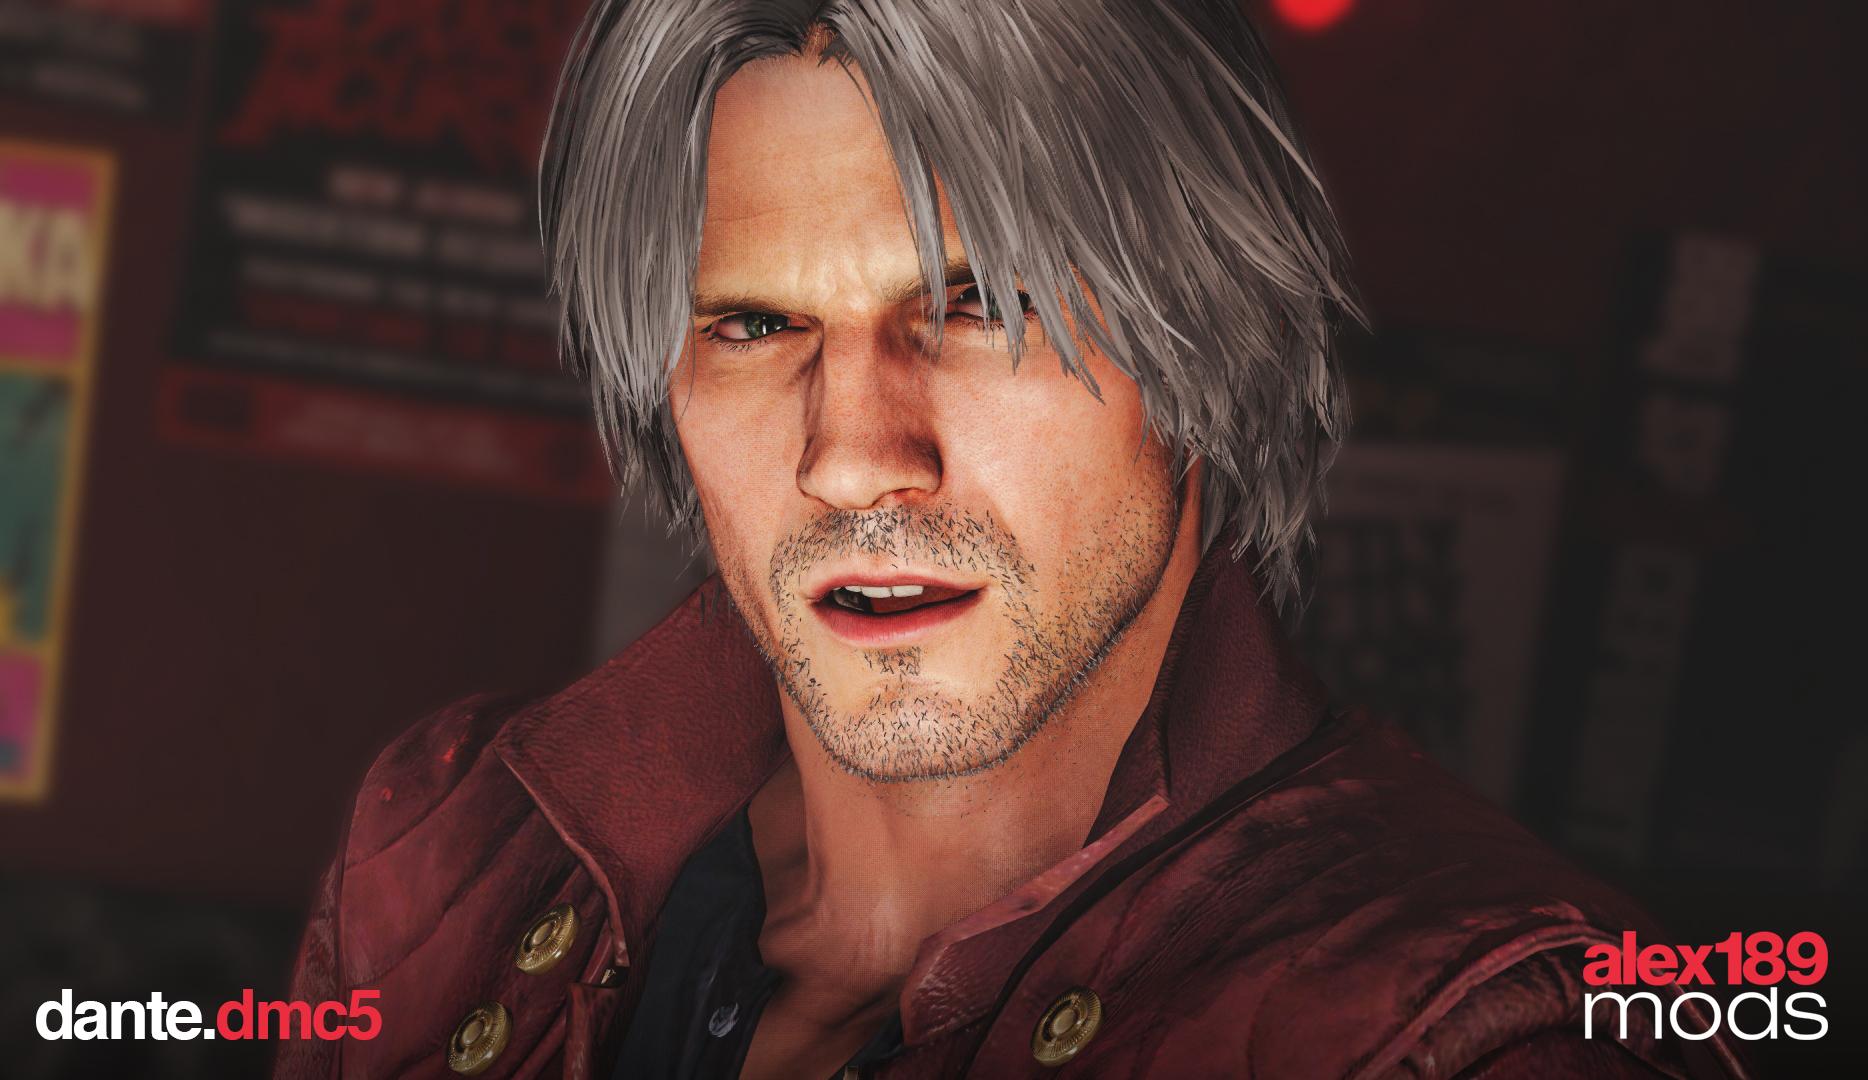 I've been growing out my hair for 7 months in order to achieve Dante's  haircut : r/DevilMayCry, dmc dante haircut